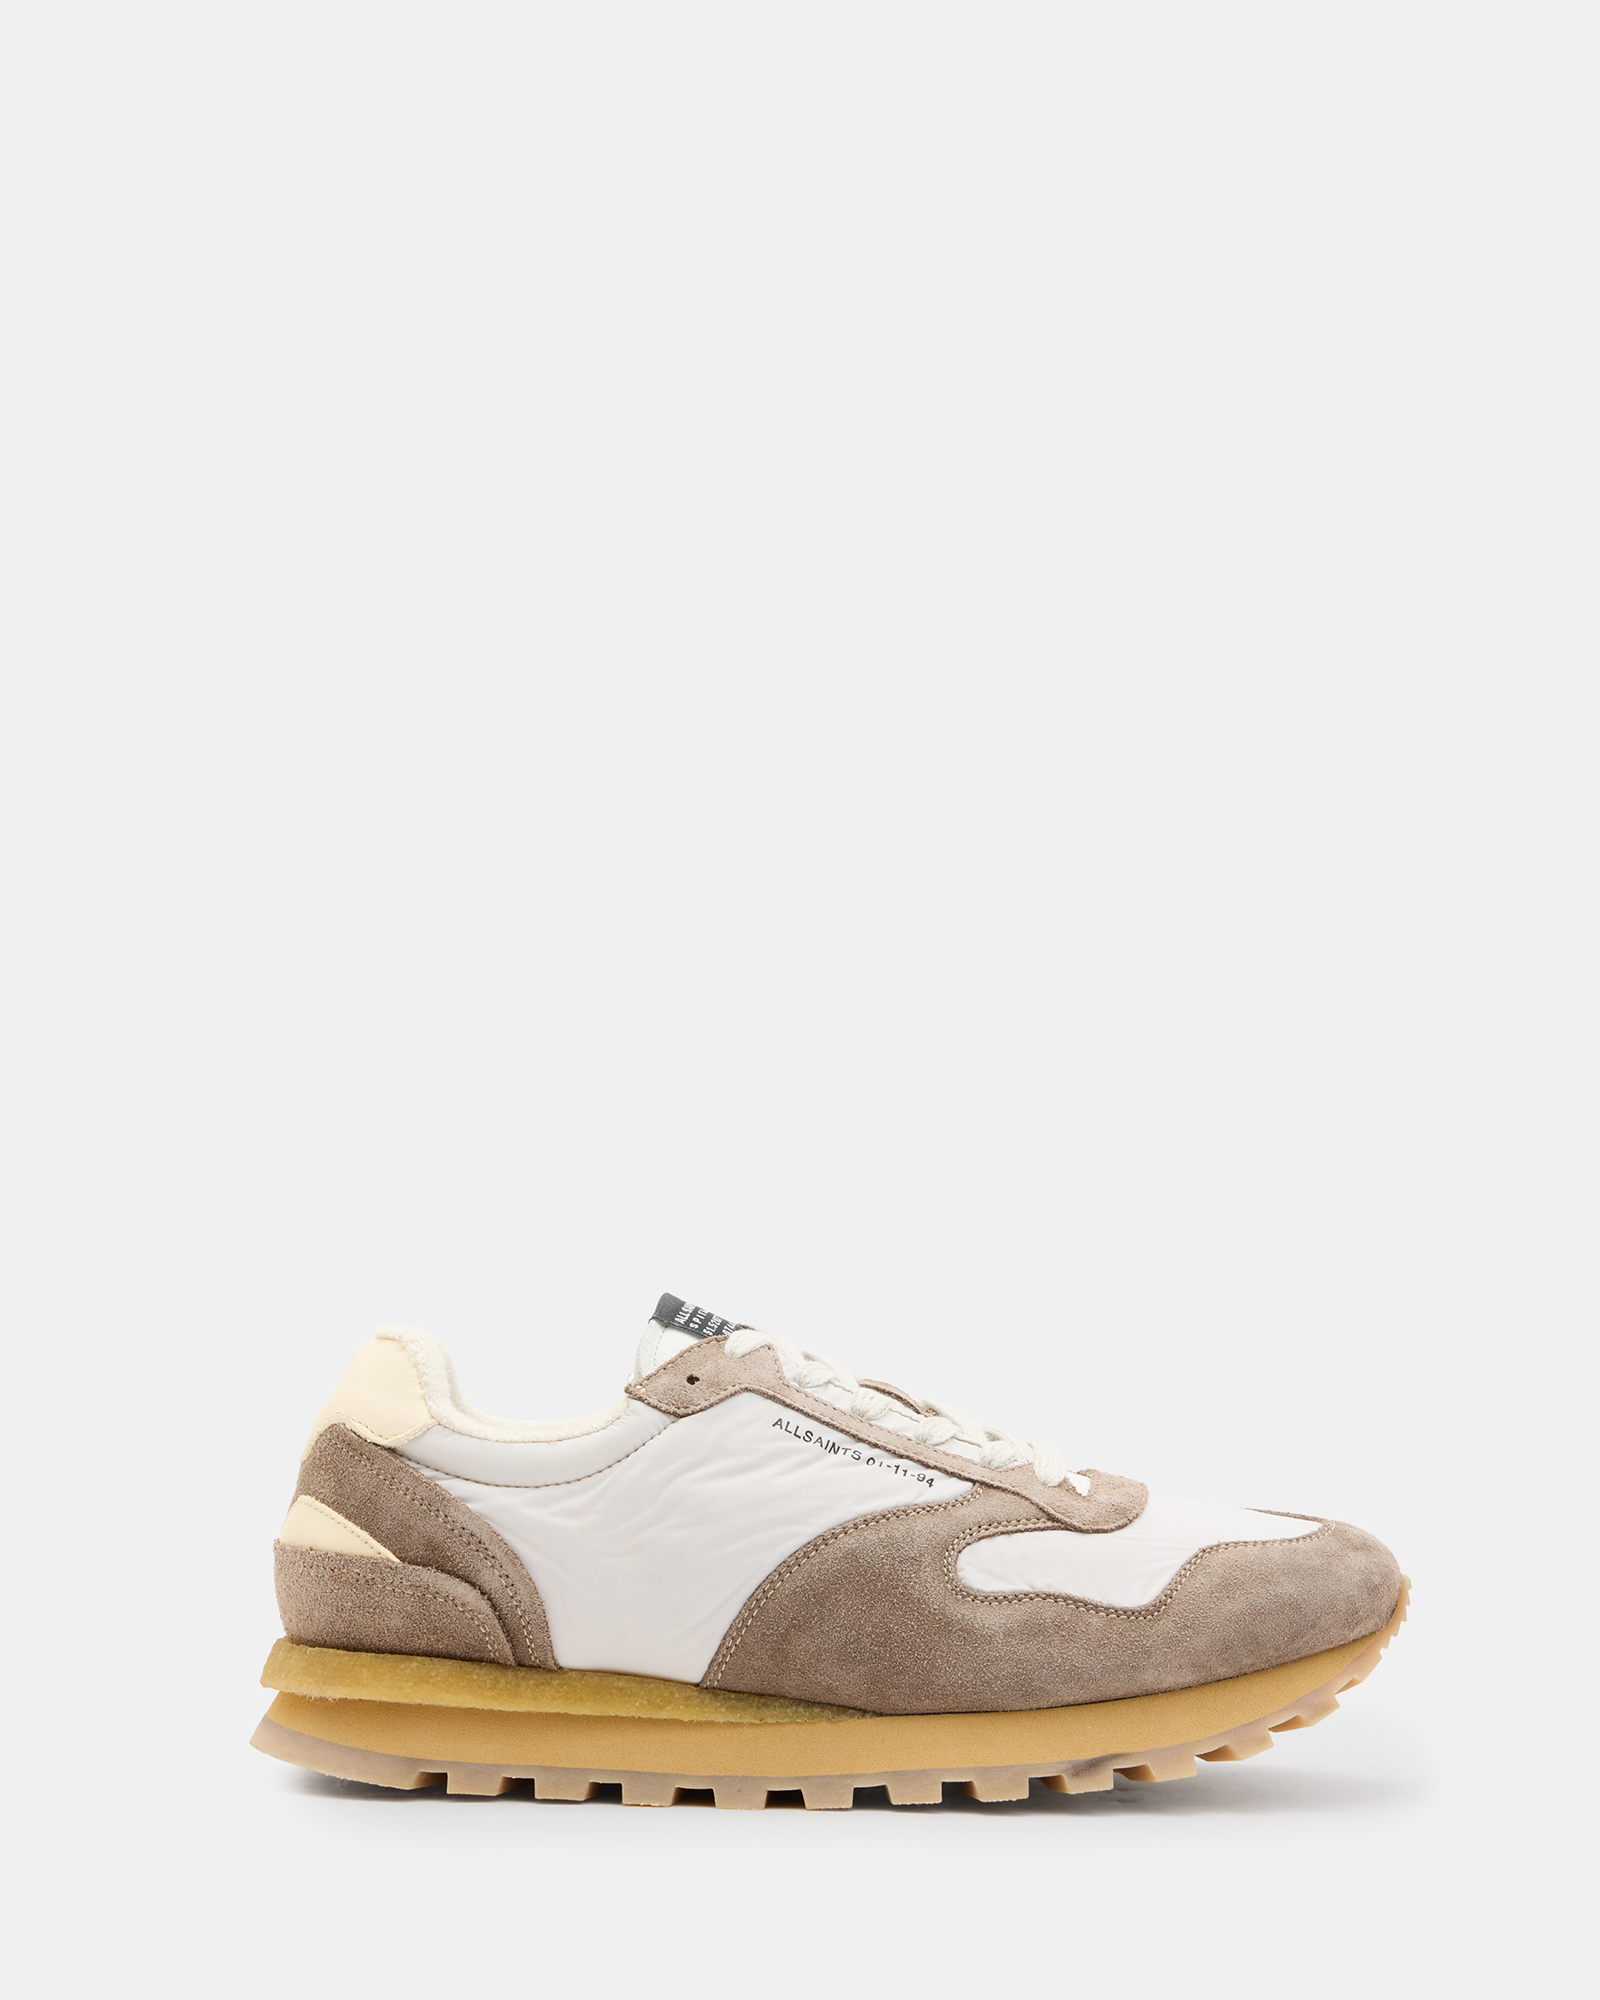 AllSaints Rimini Leather Lower Top Trainers,, Taupe